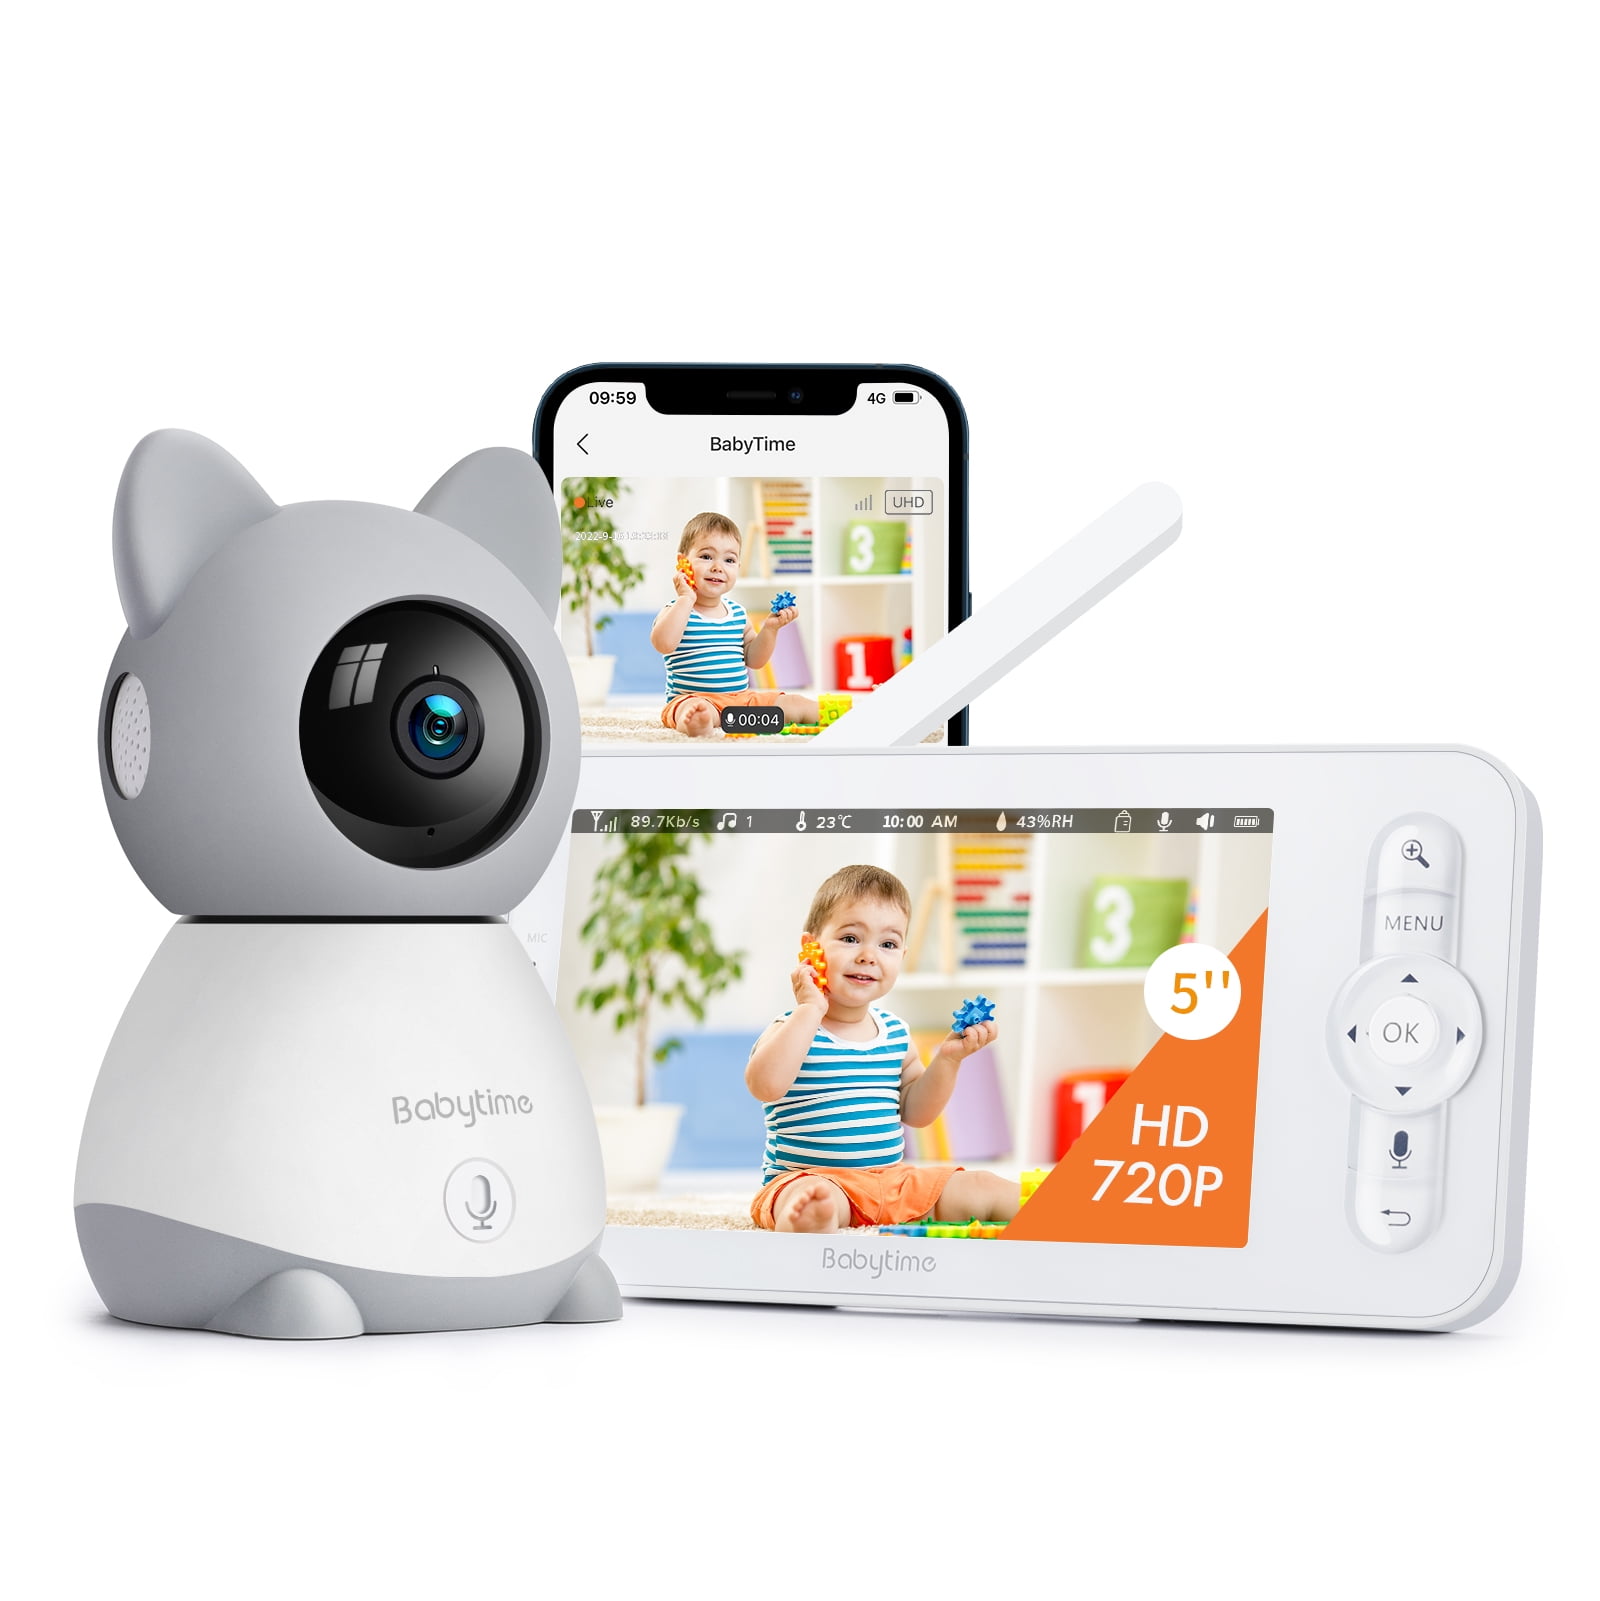  JUAN Video Baby Monitor with Camera and Audio - No WiFi Baby  Camera Monitor with 3.2'' IPS Screen for Kids/Pets/Elderly, Pan/Tilt/Zoom  Camera, 1000FT, Night Vision, VOX Mode : Baby